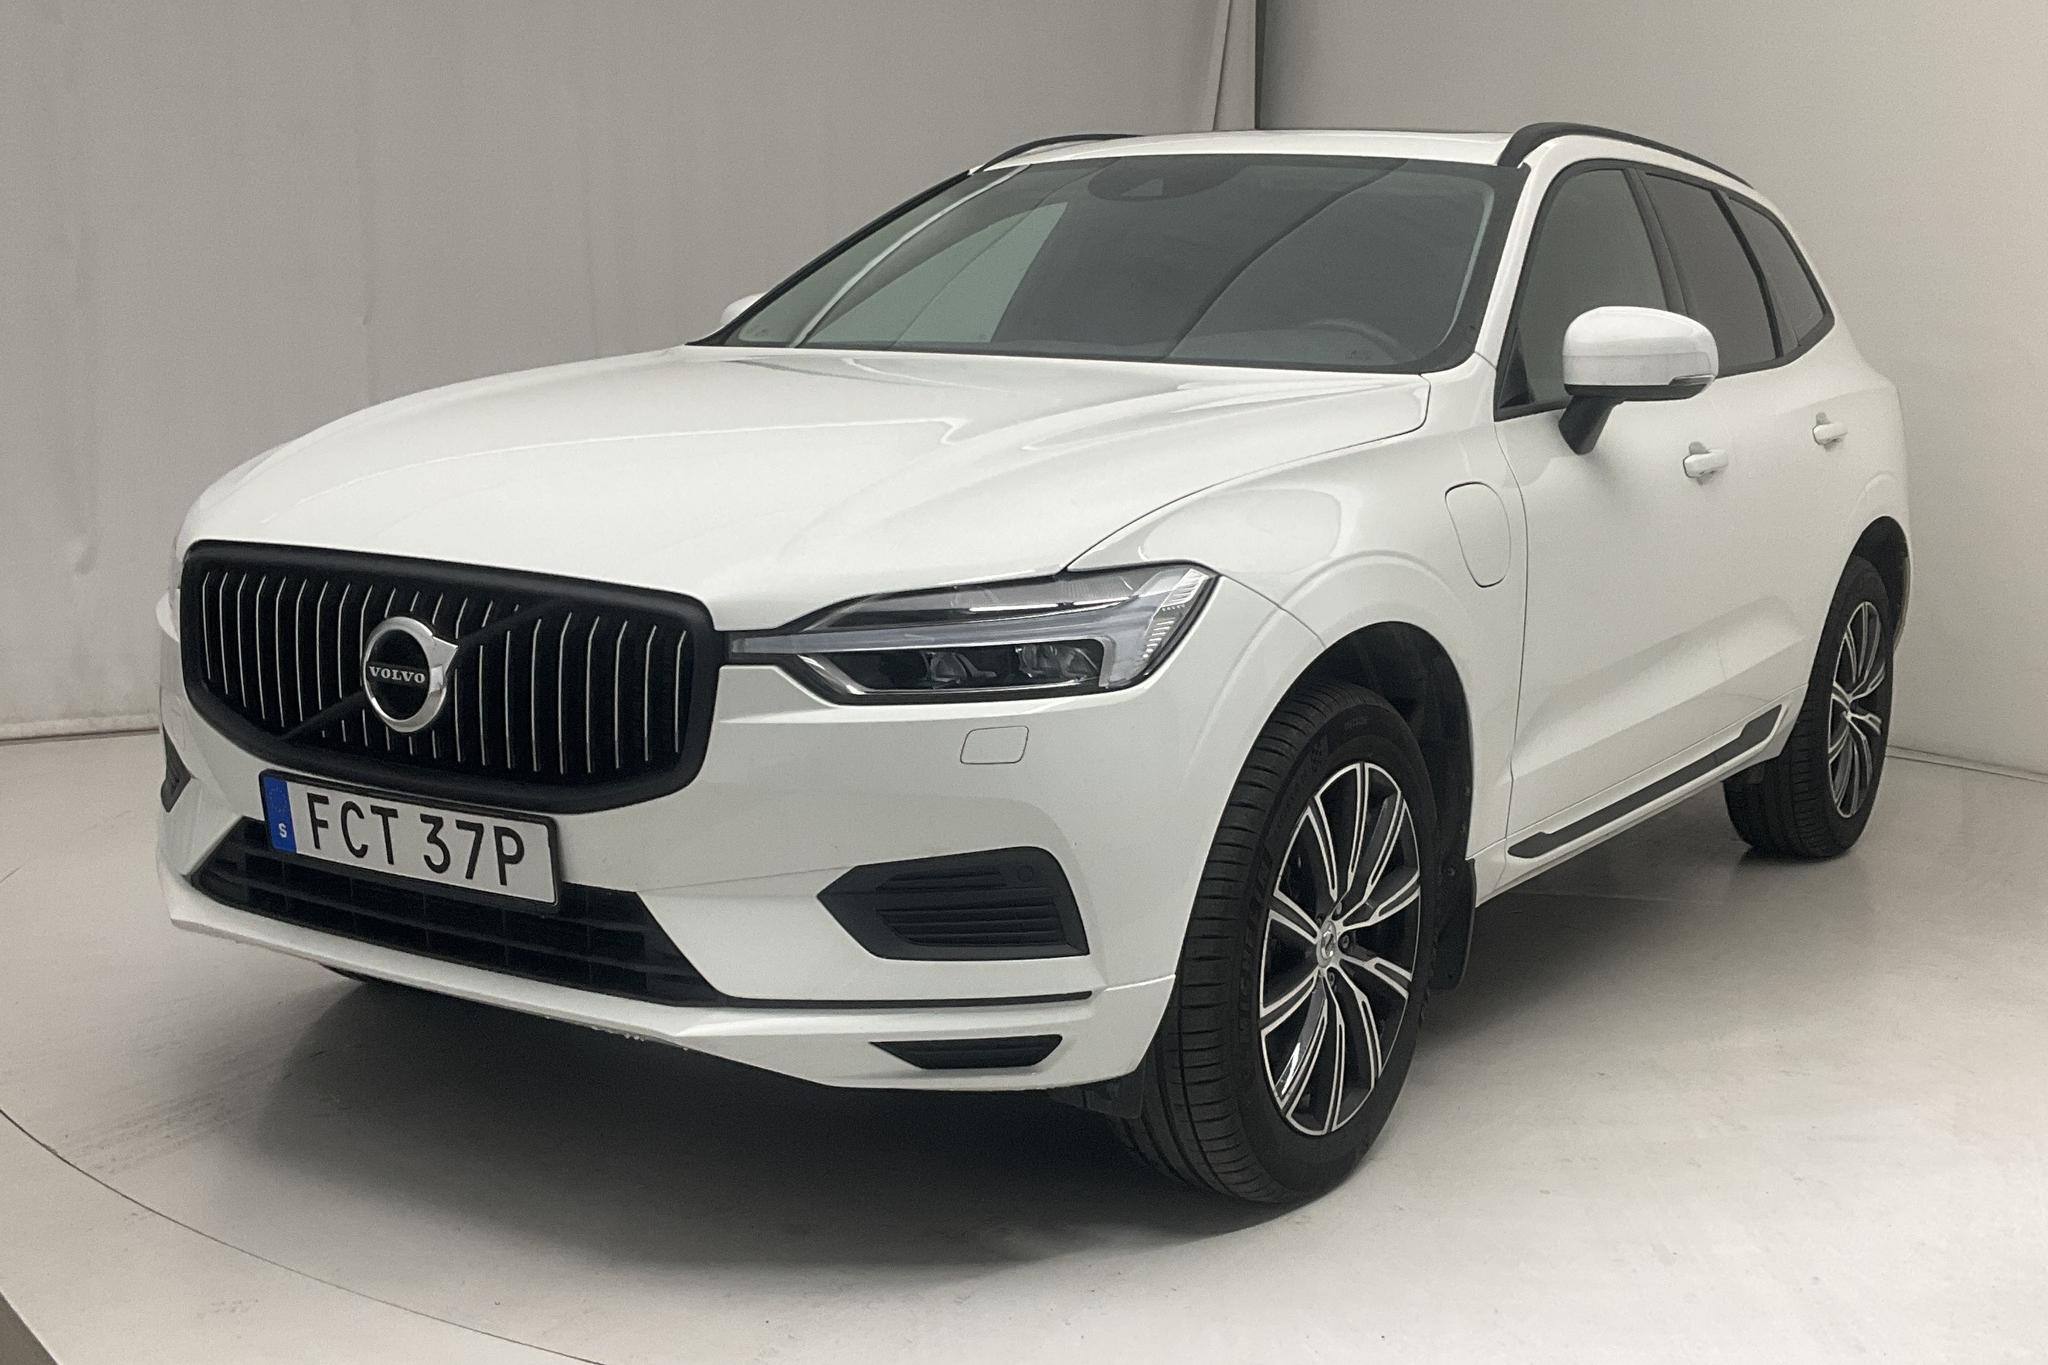 Volvo XC60 T6 AWD Recharge (340hk) - 44 480 km - Automatic - white - 2021